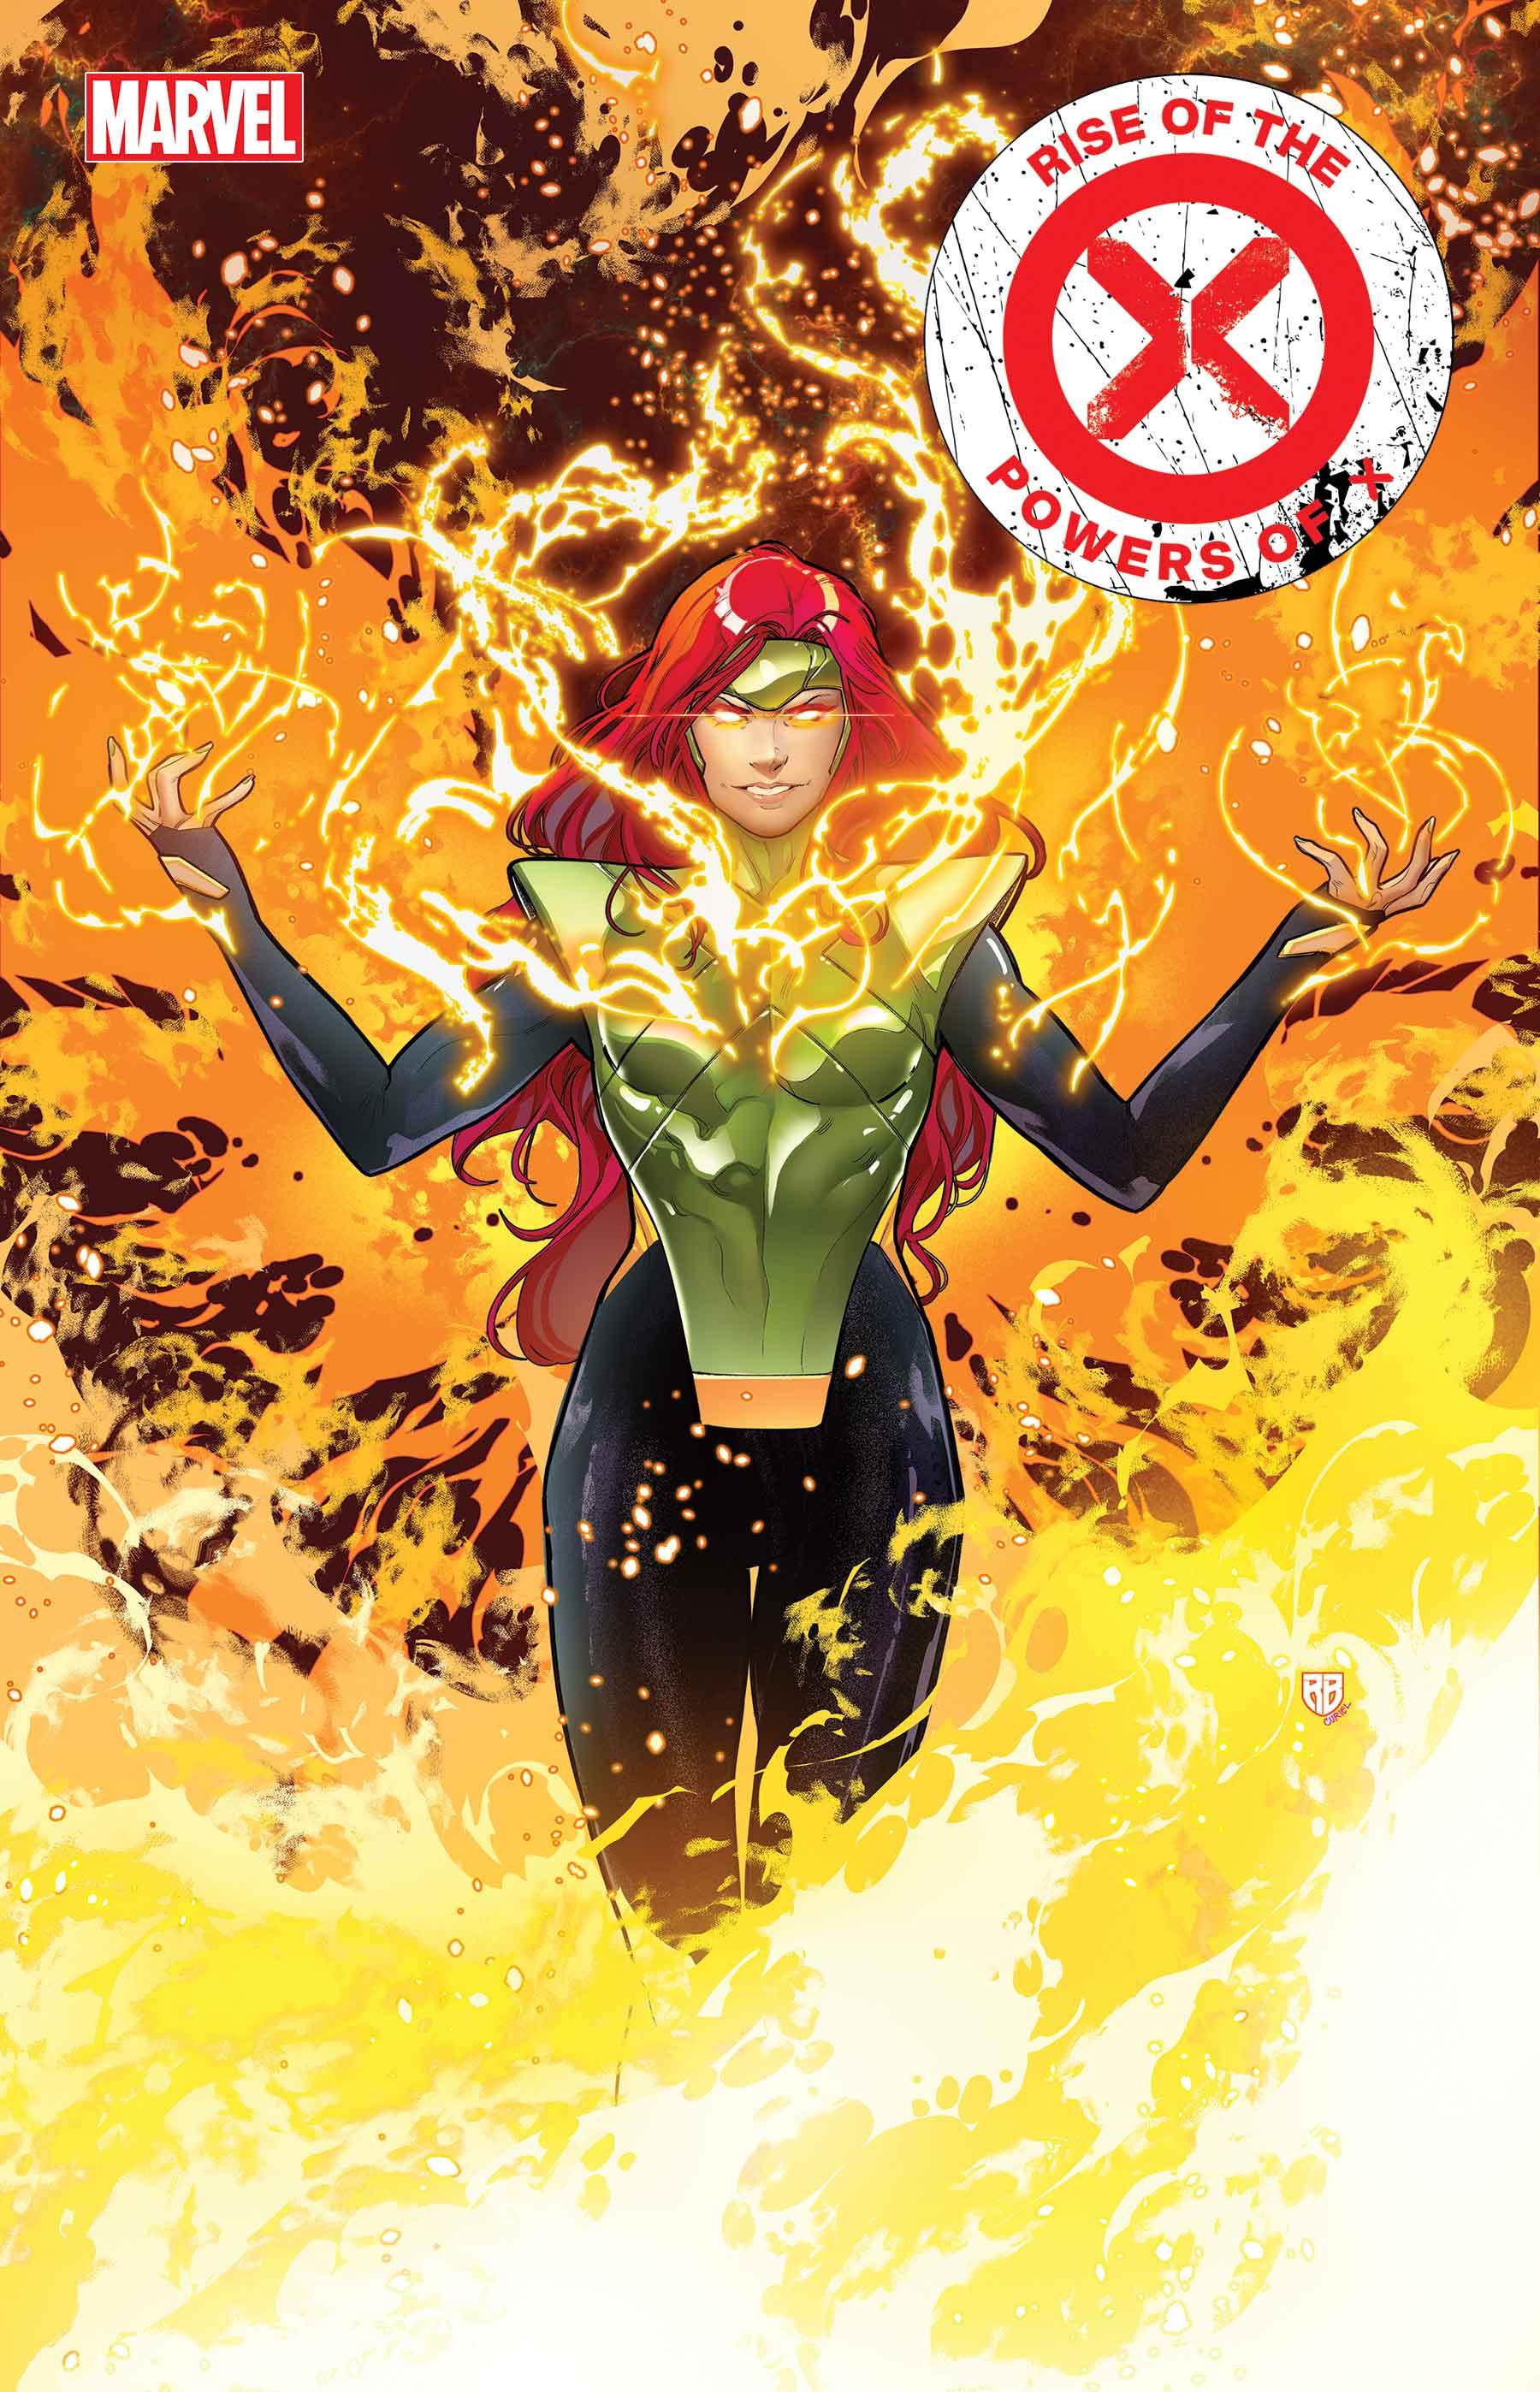 Rise of the Powers of X #5 cover art